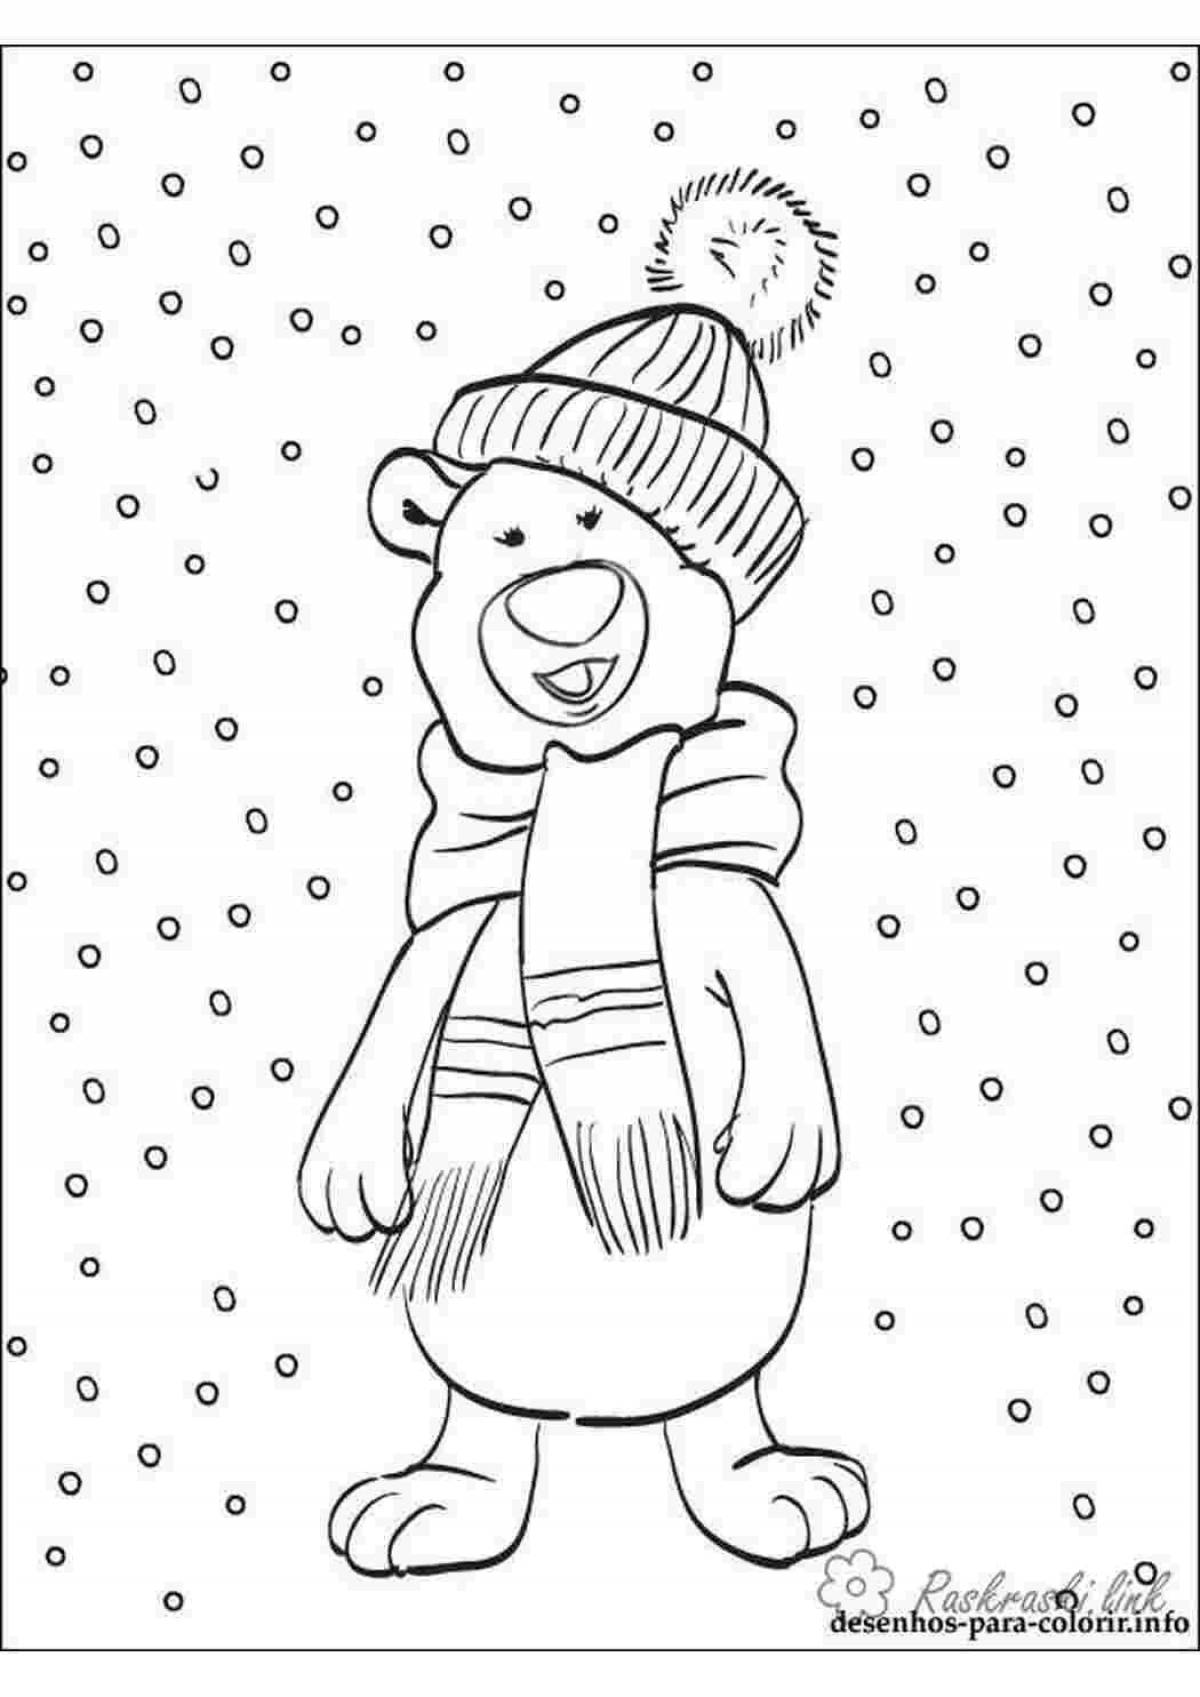 Live coloring simple winter